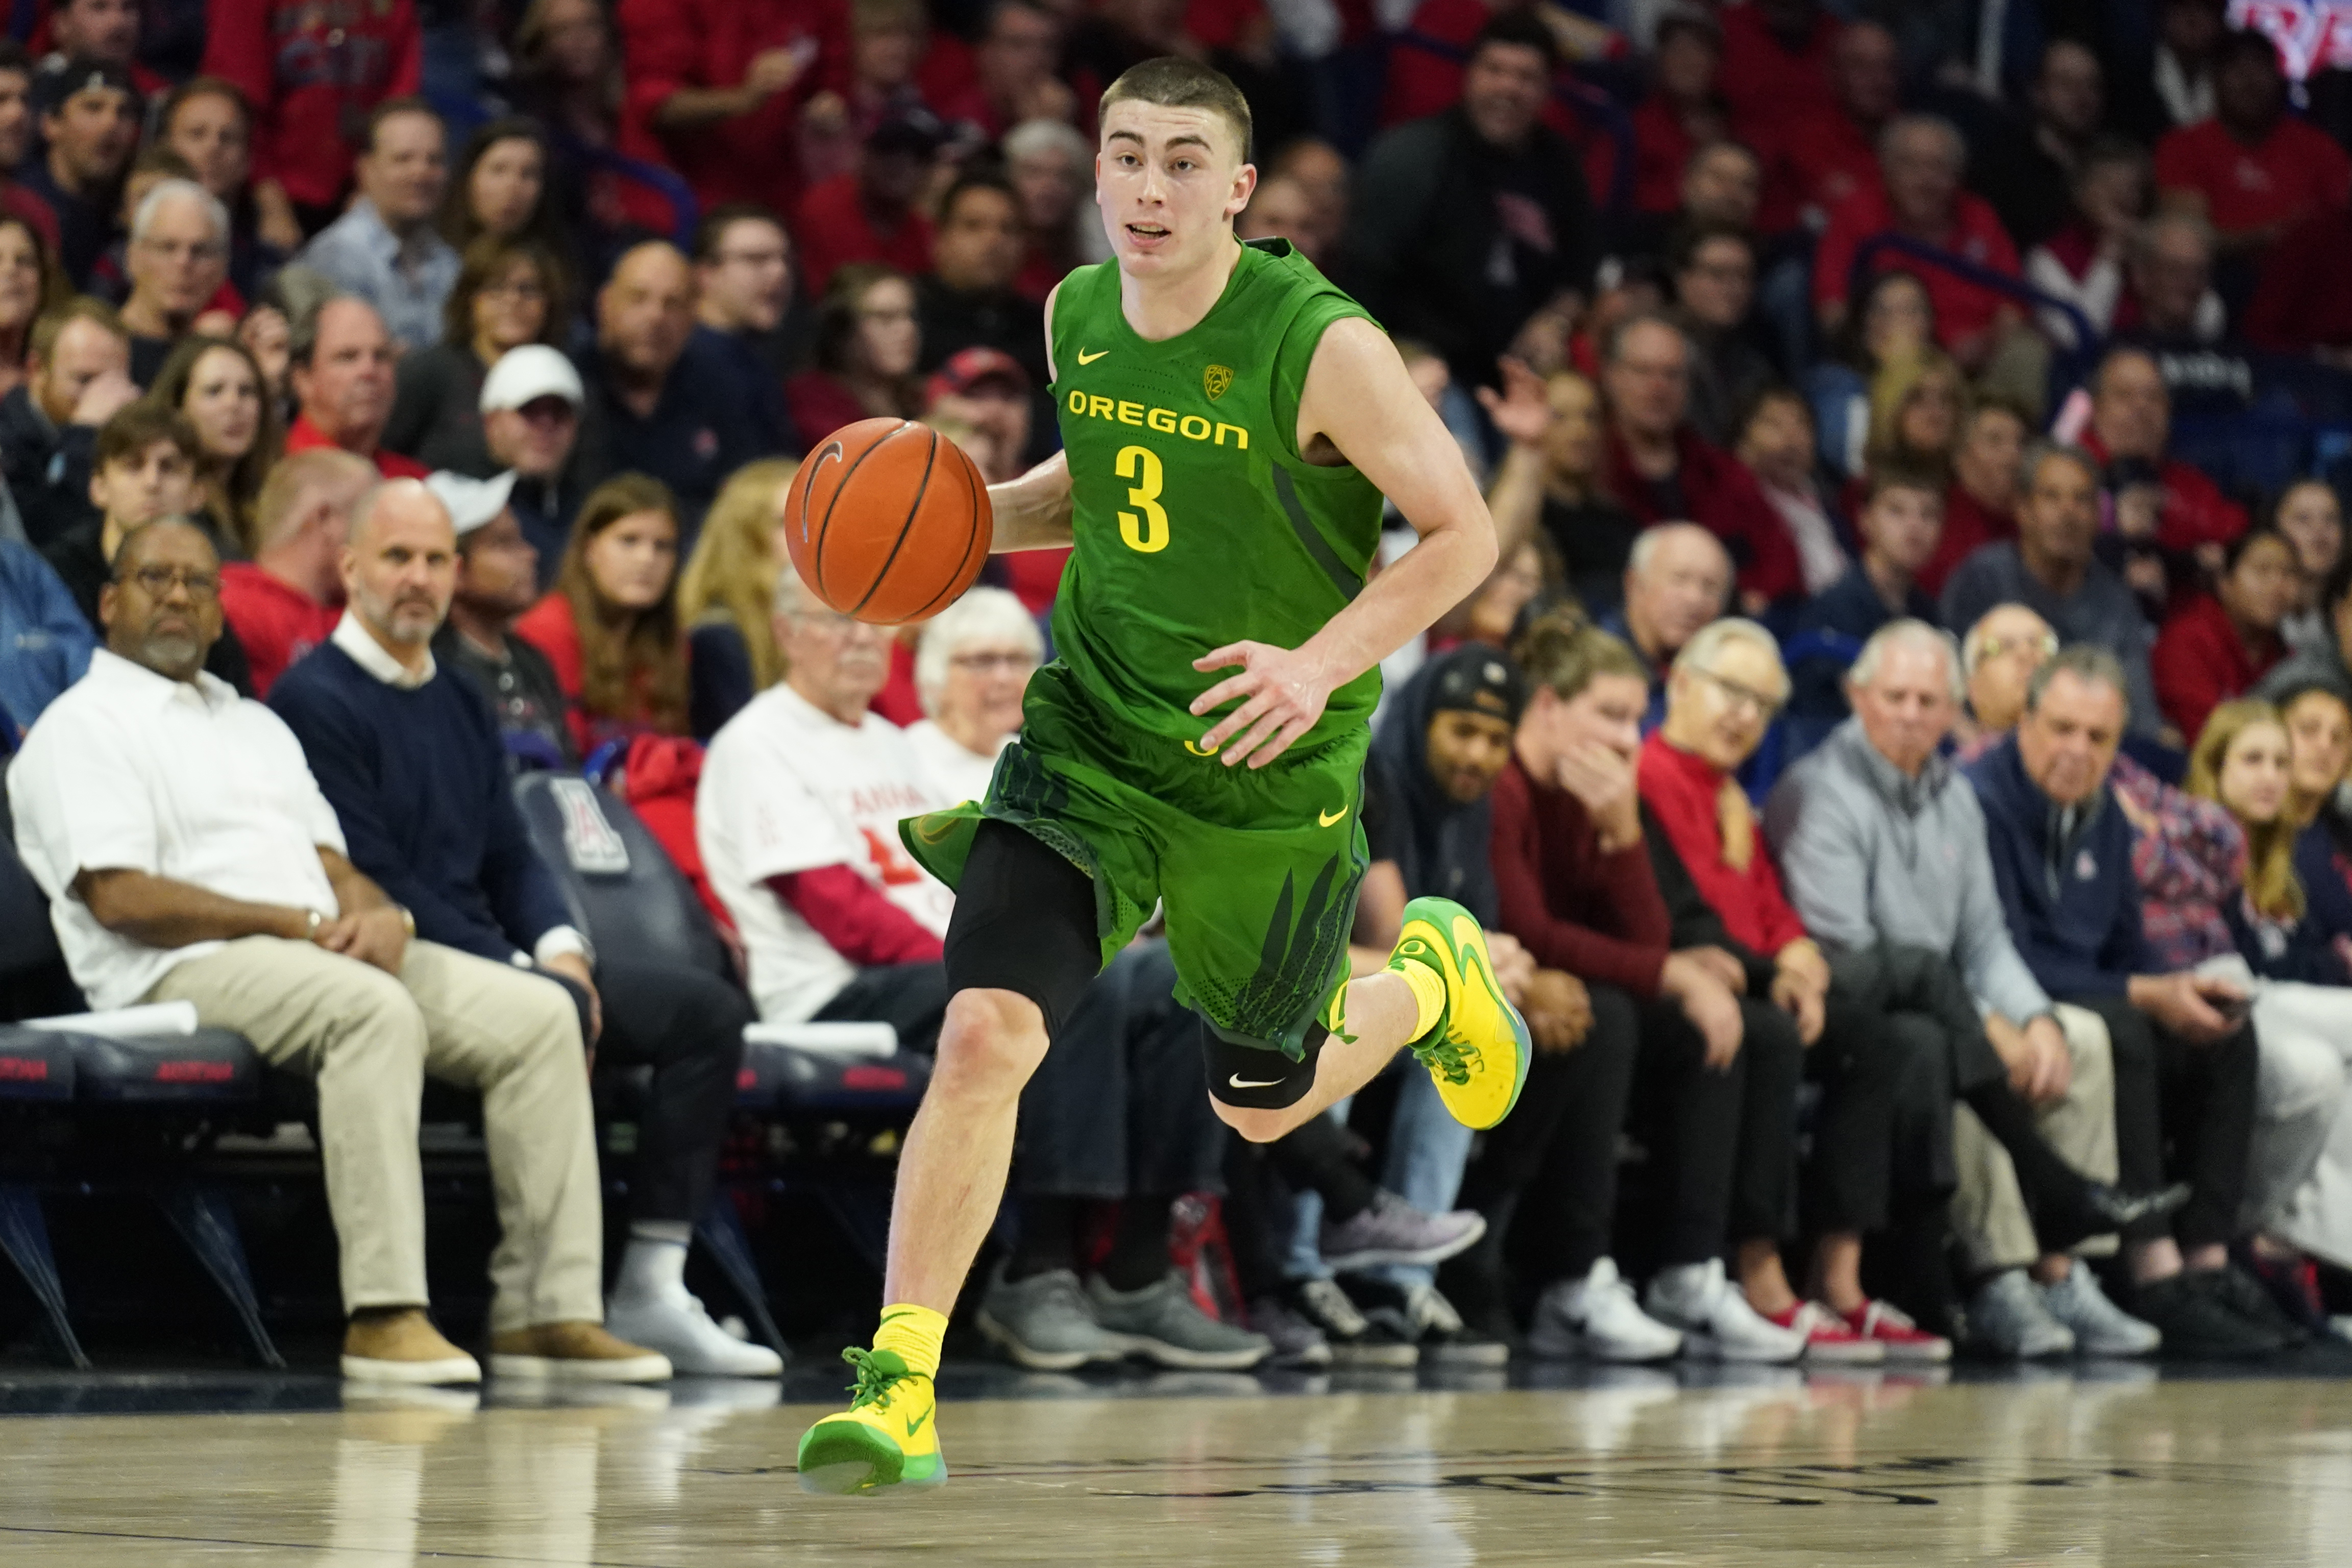 Aaron Nesmith and Payton Pritchard introduced by Celtics - CLNS Media